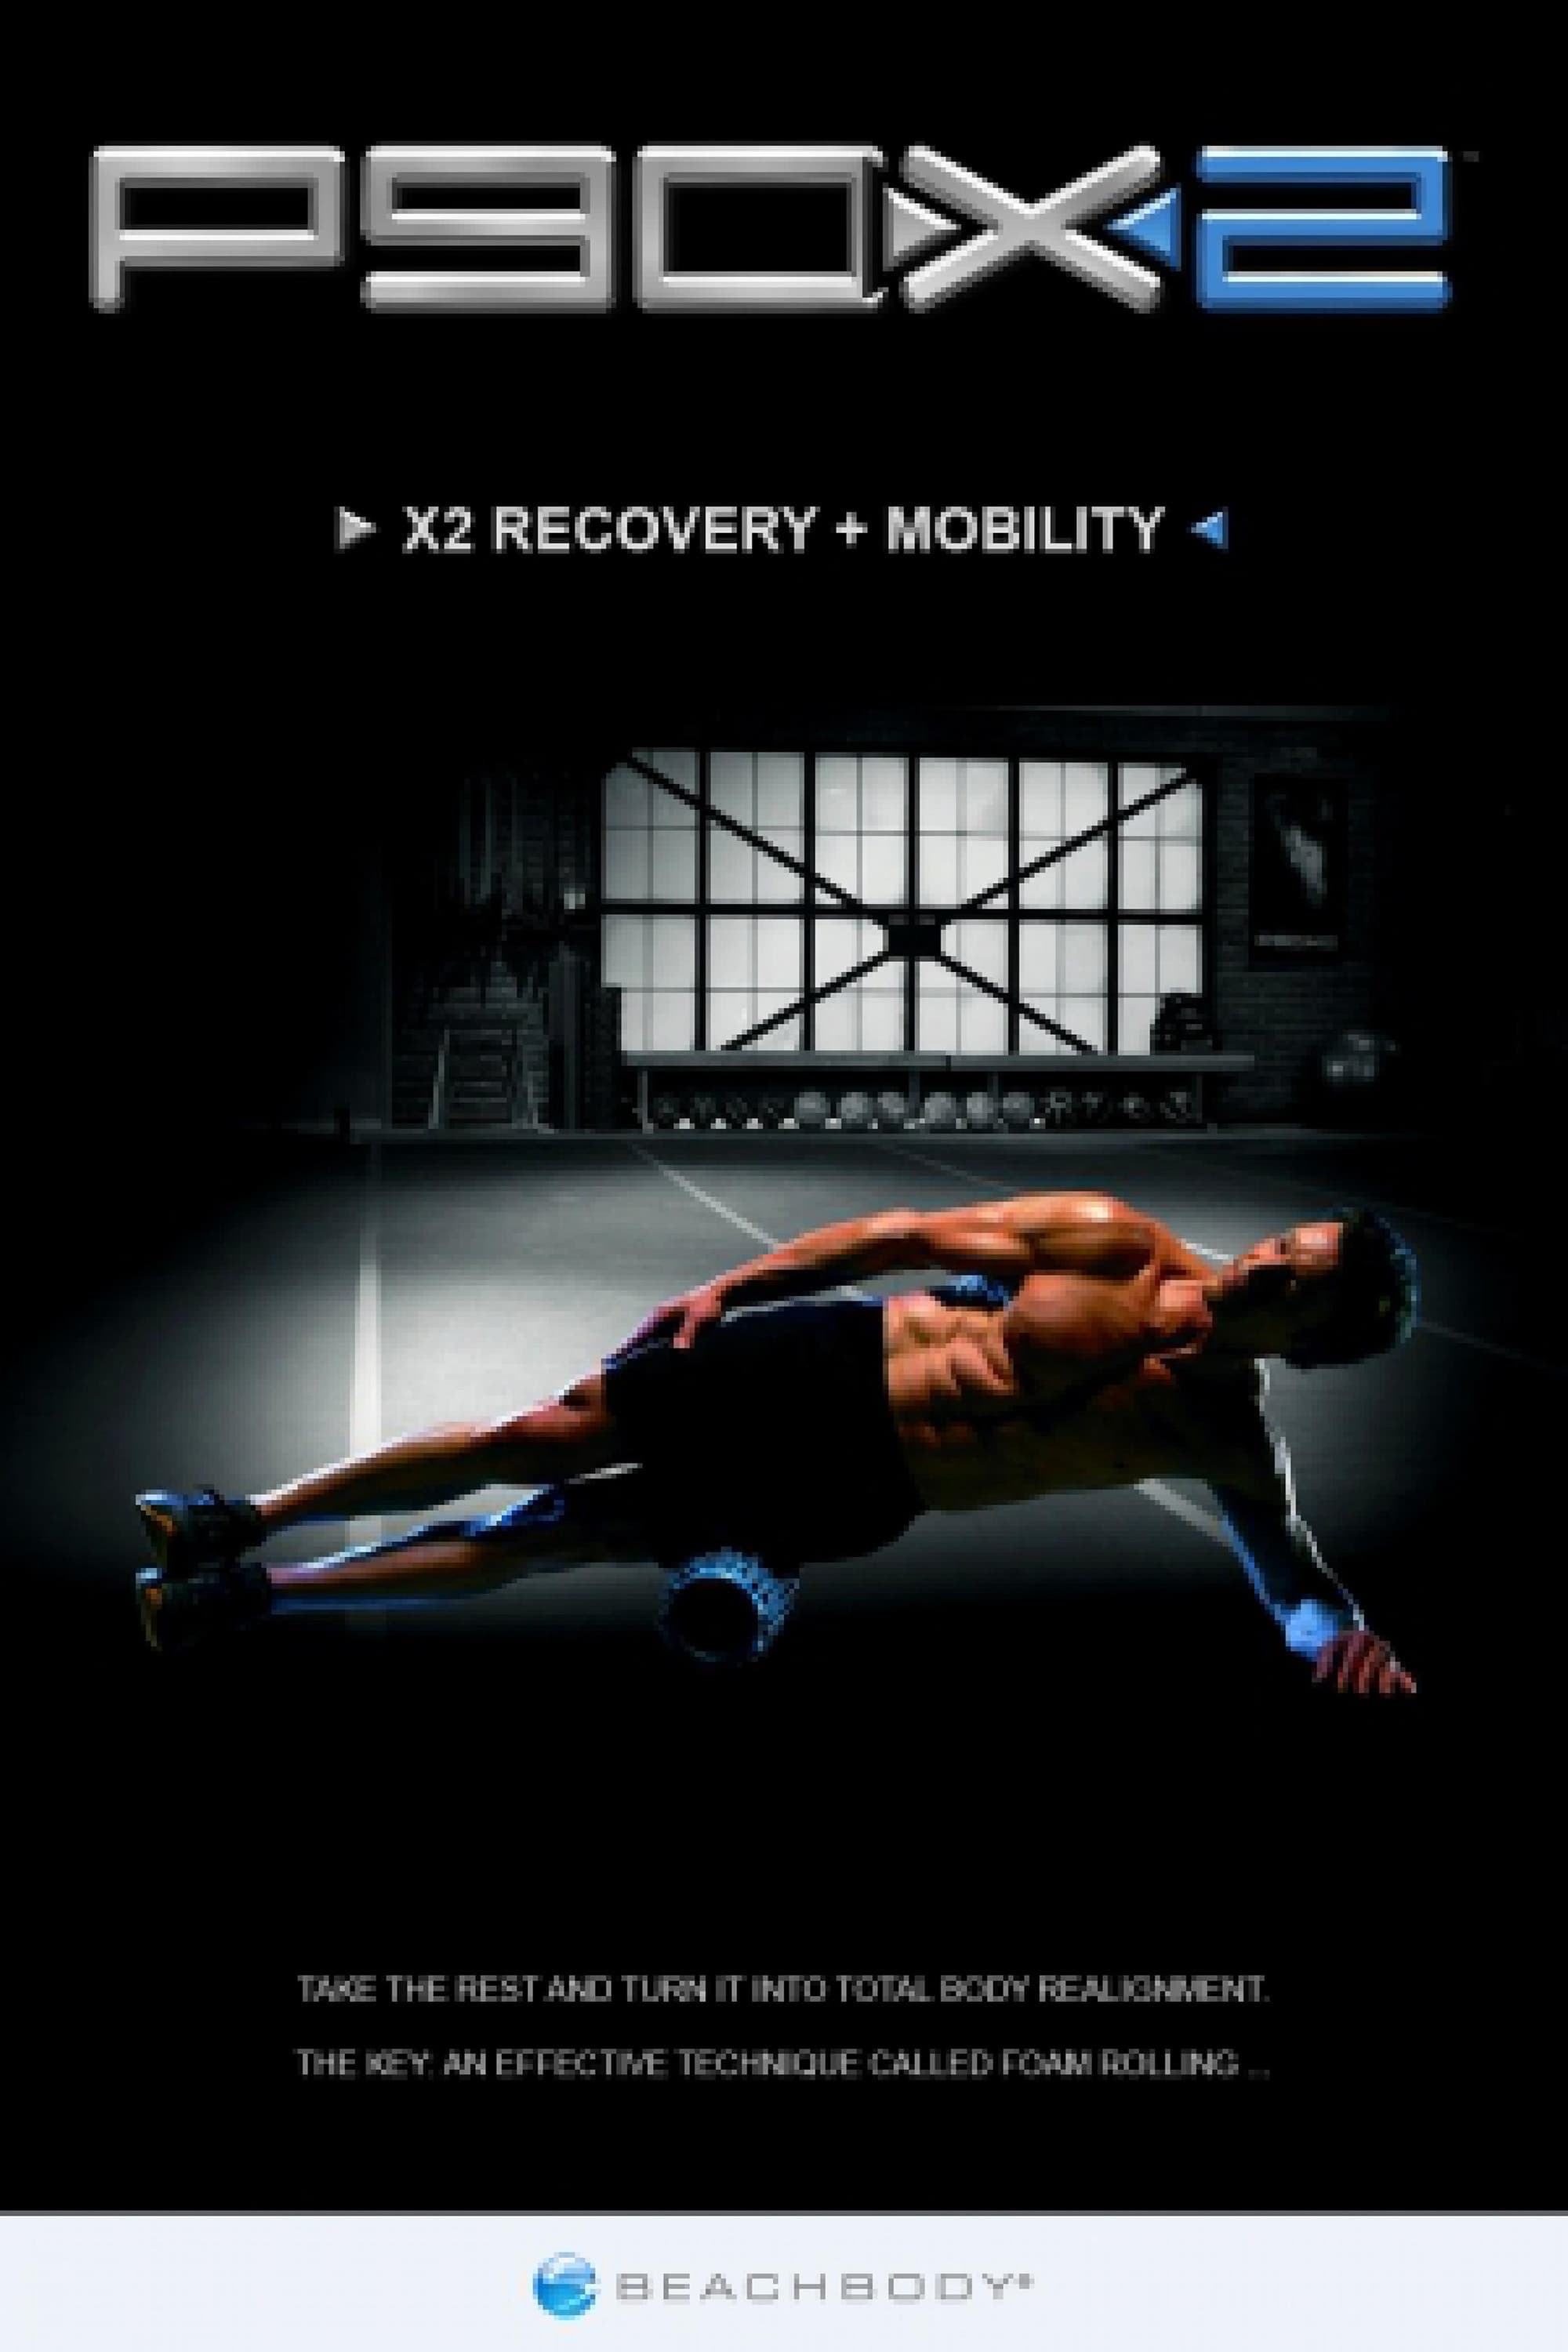 P90X2 - X2 Recovery + Mobility